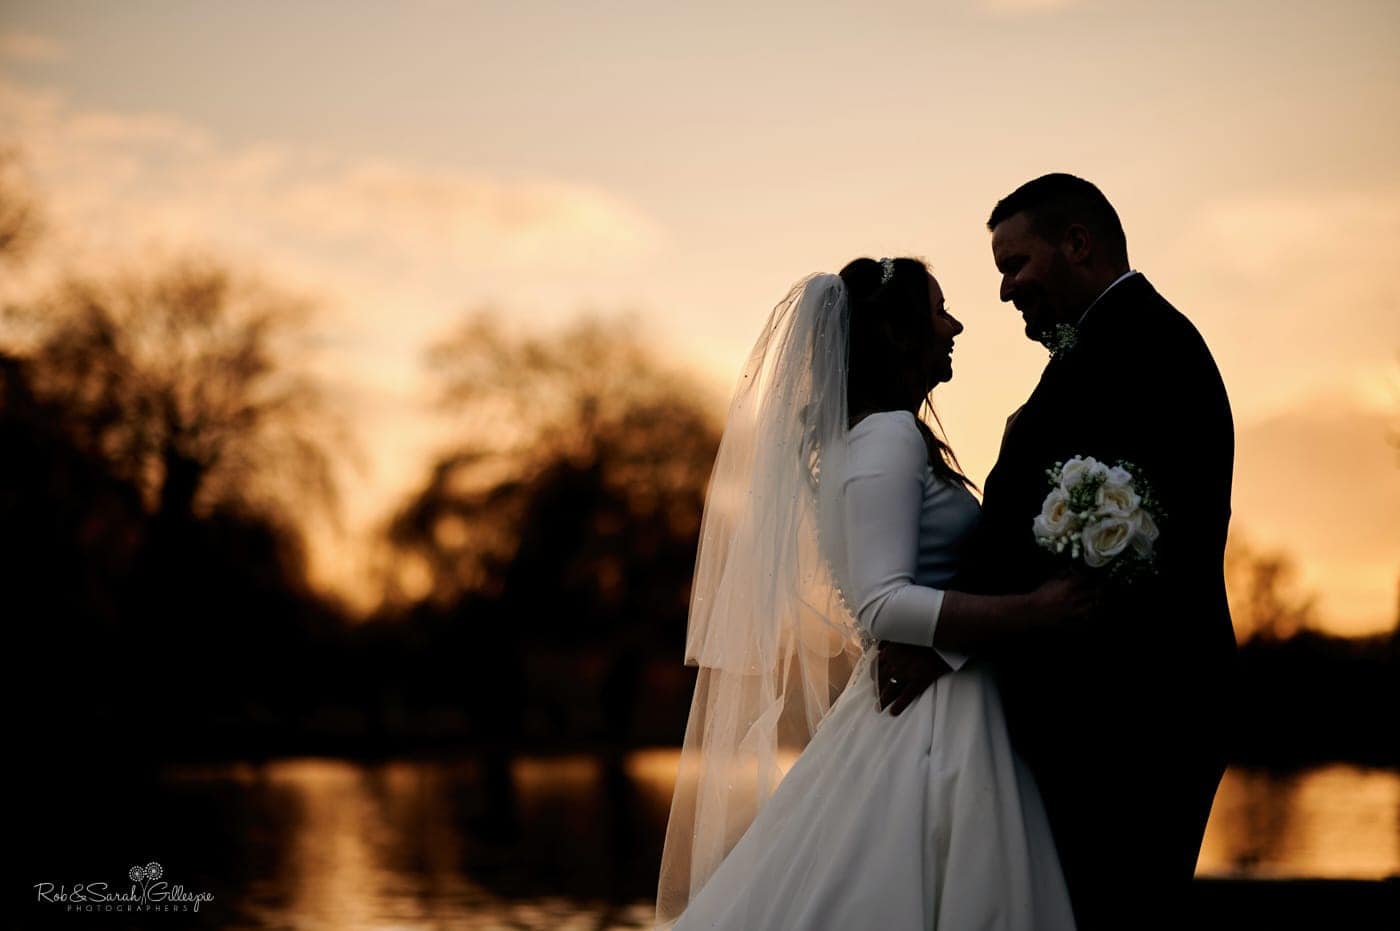 Bride and groom silhouetted against susnet in Stratford upon Avon